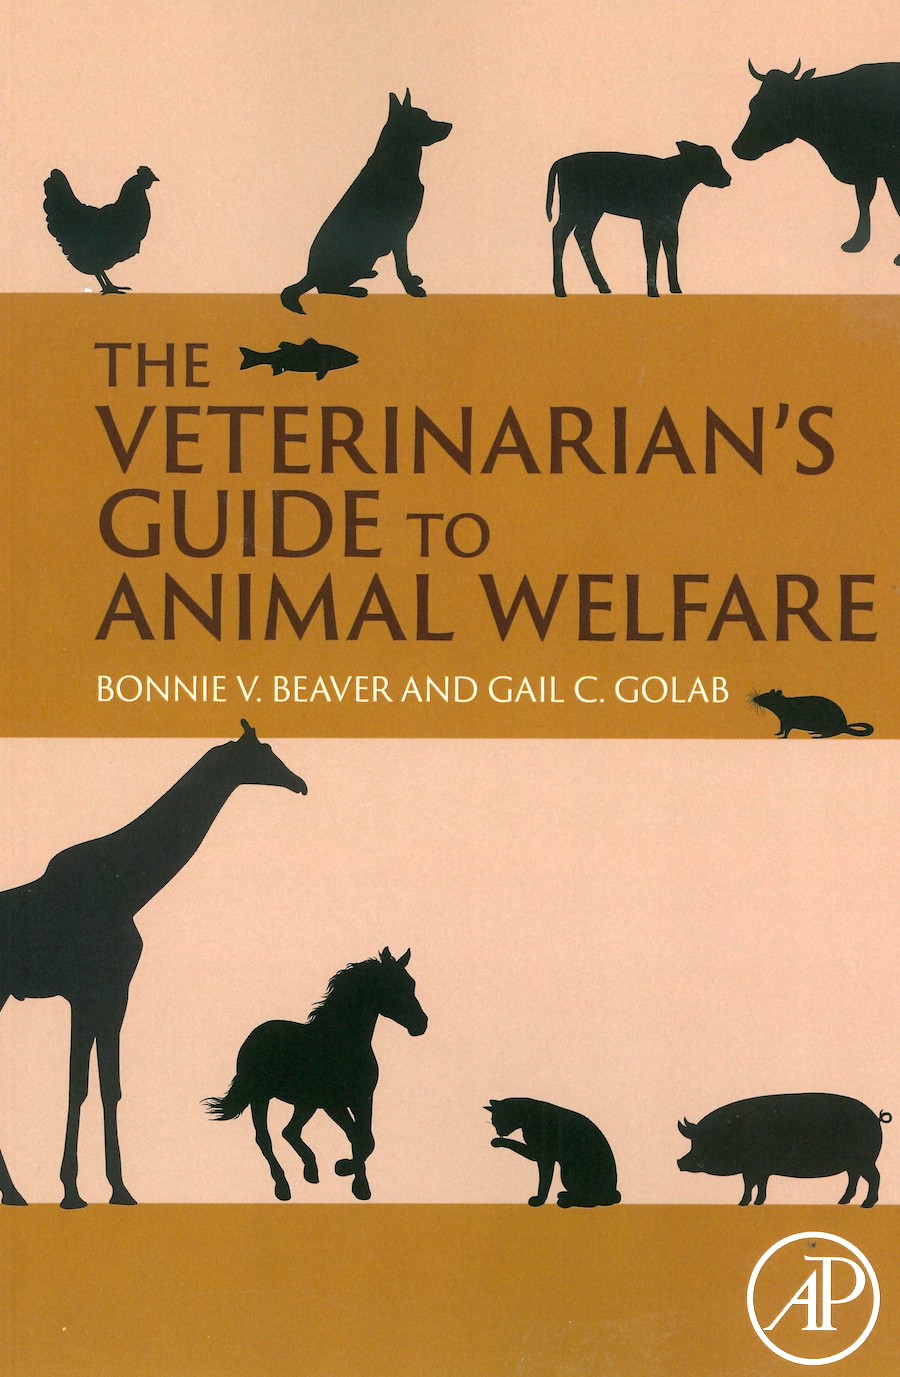 The veterinarian's guide to animal welfare